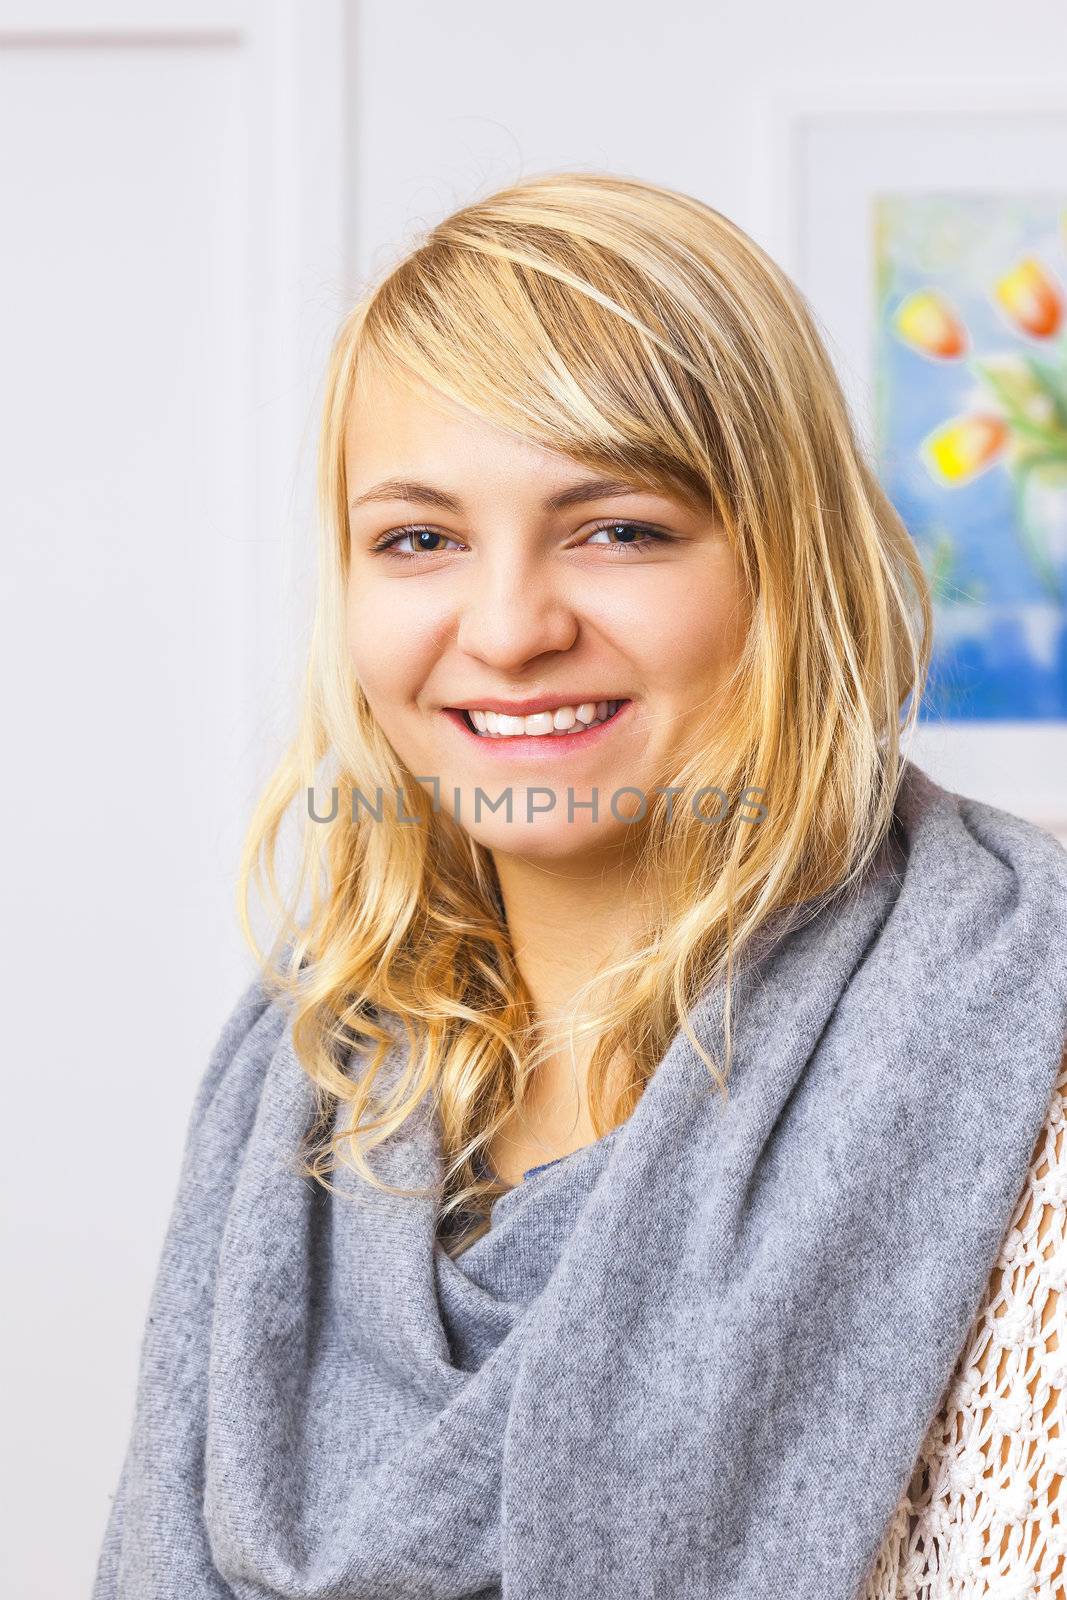 An image of a beautiful smiling blond girl